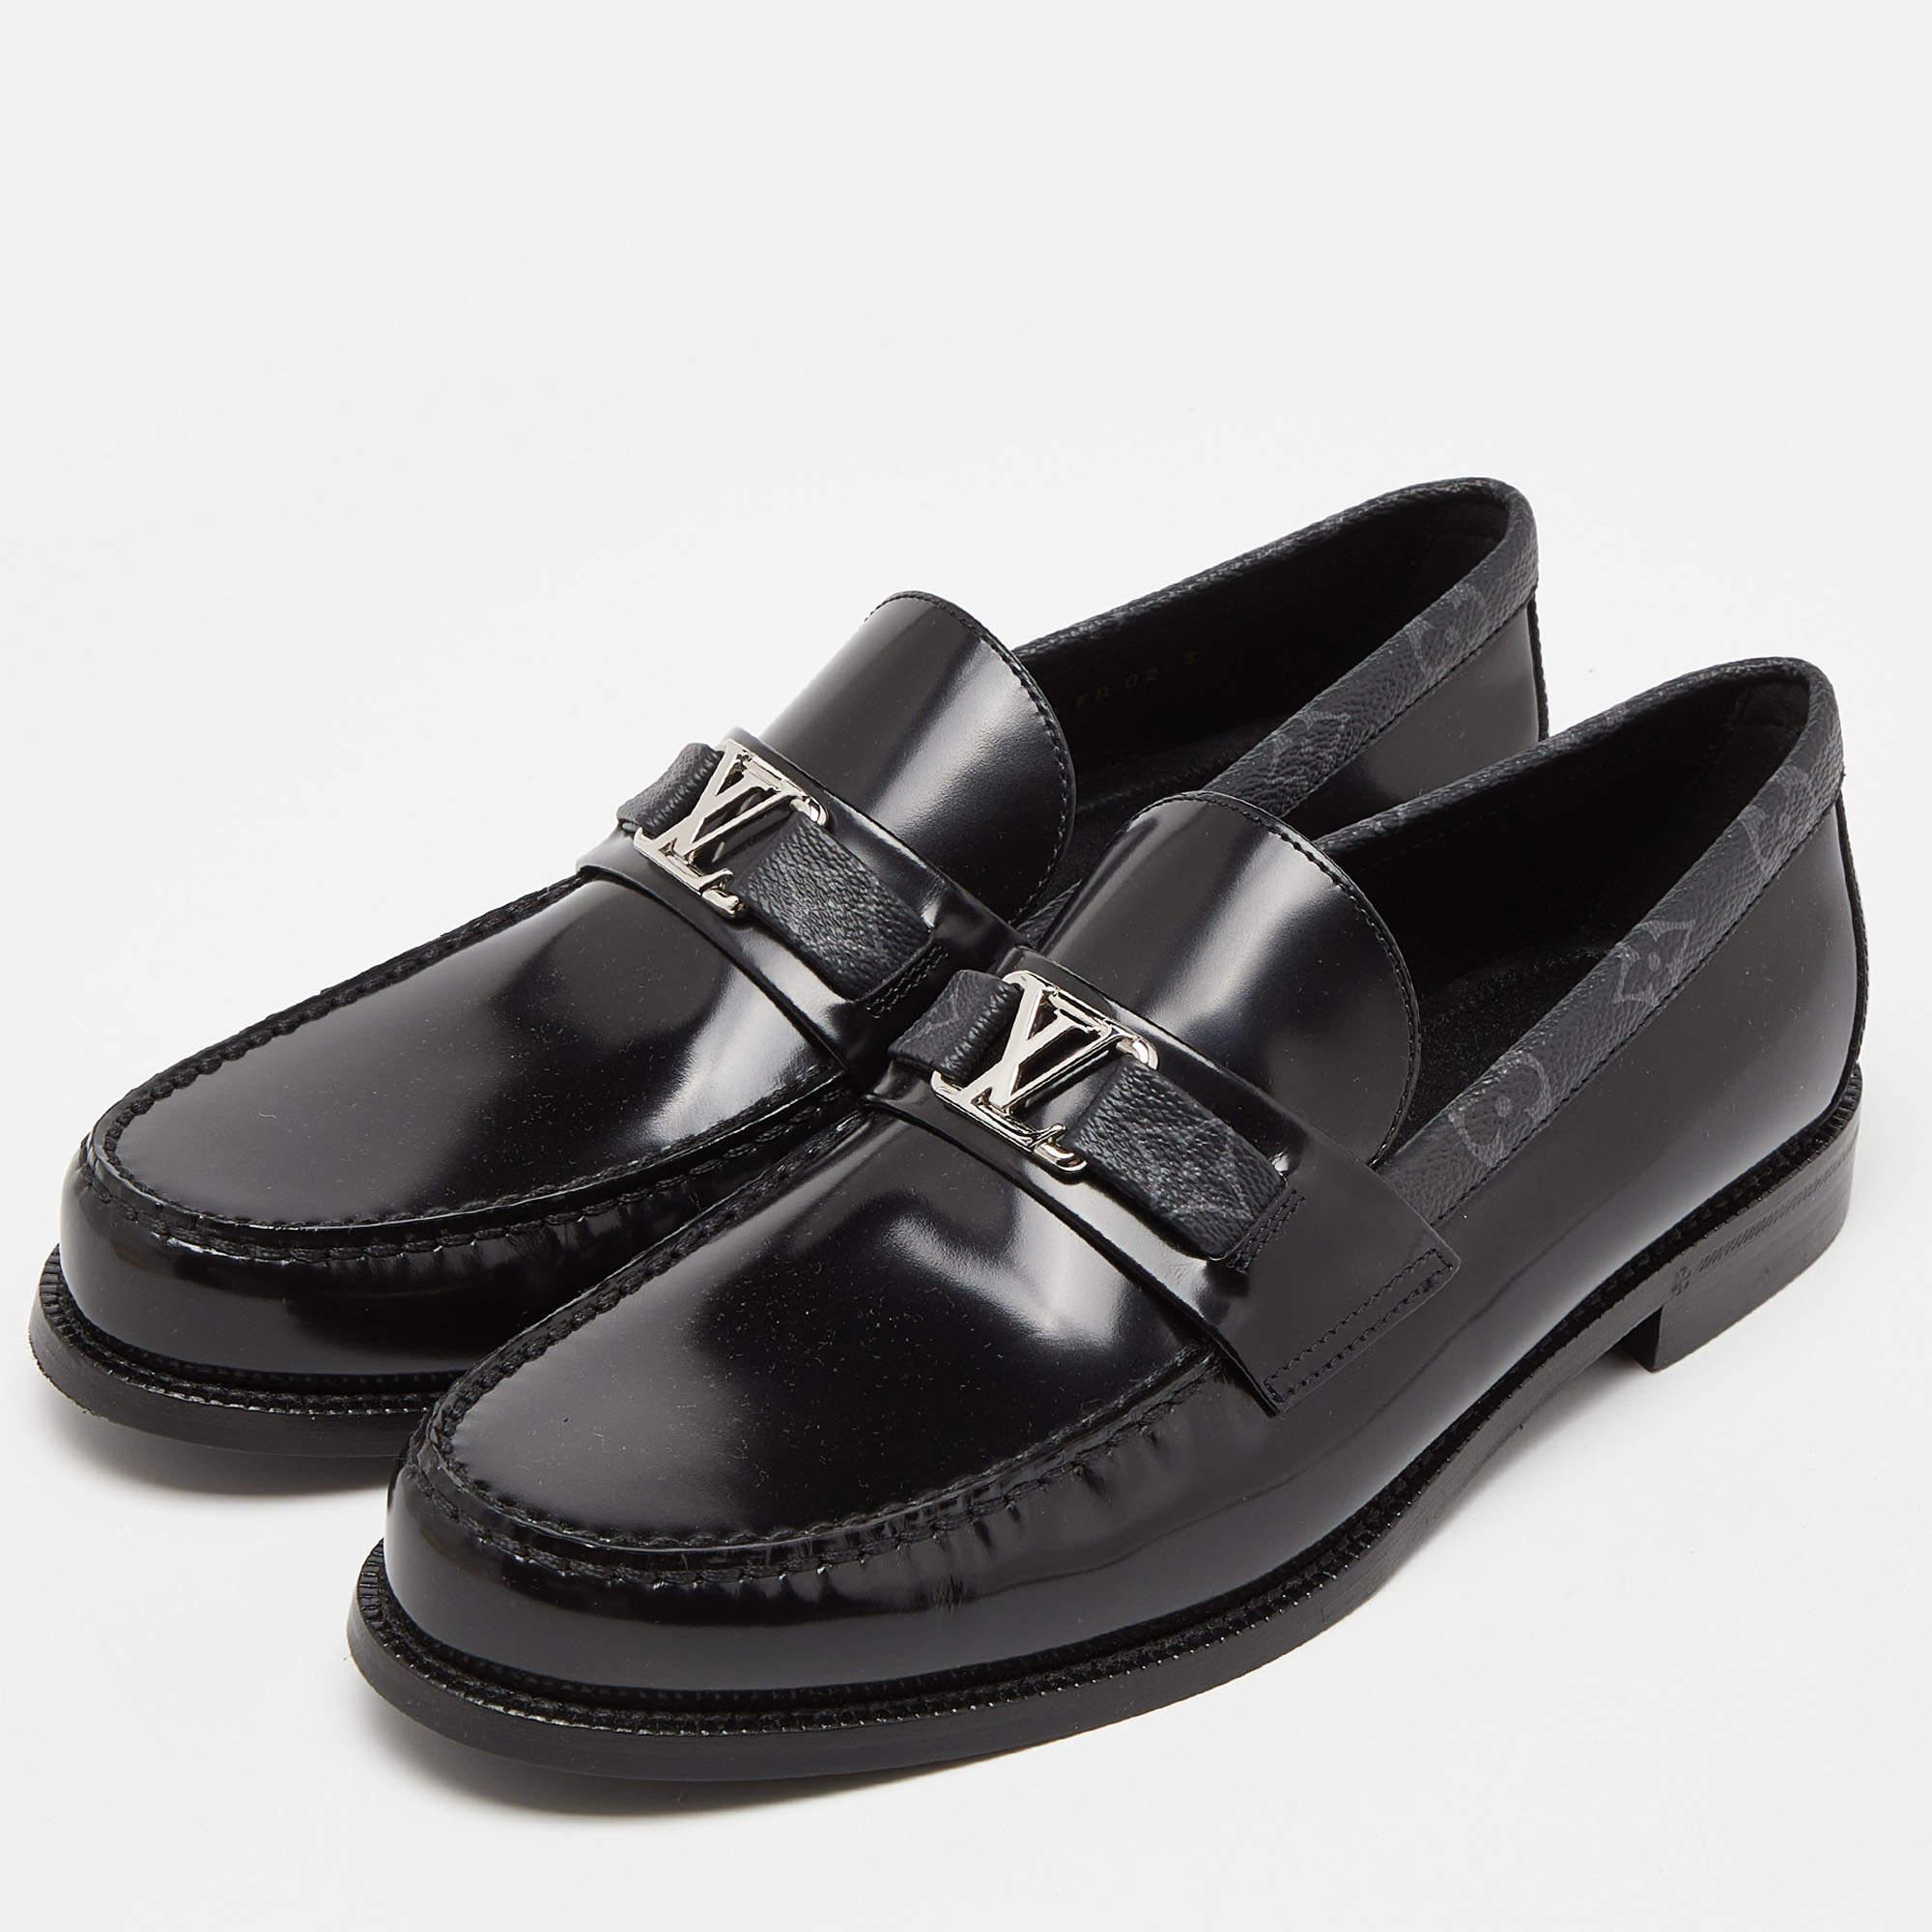 Black Louis Vuitton Monogram Canvas and Leather Major Loafers Size 43